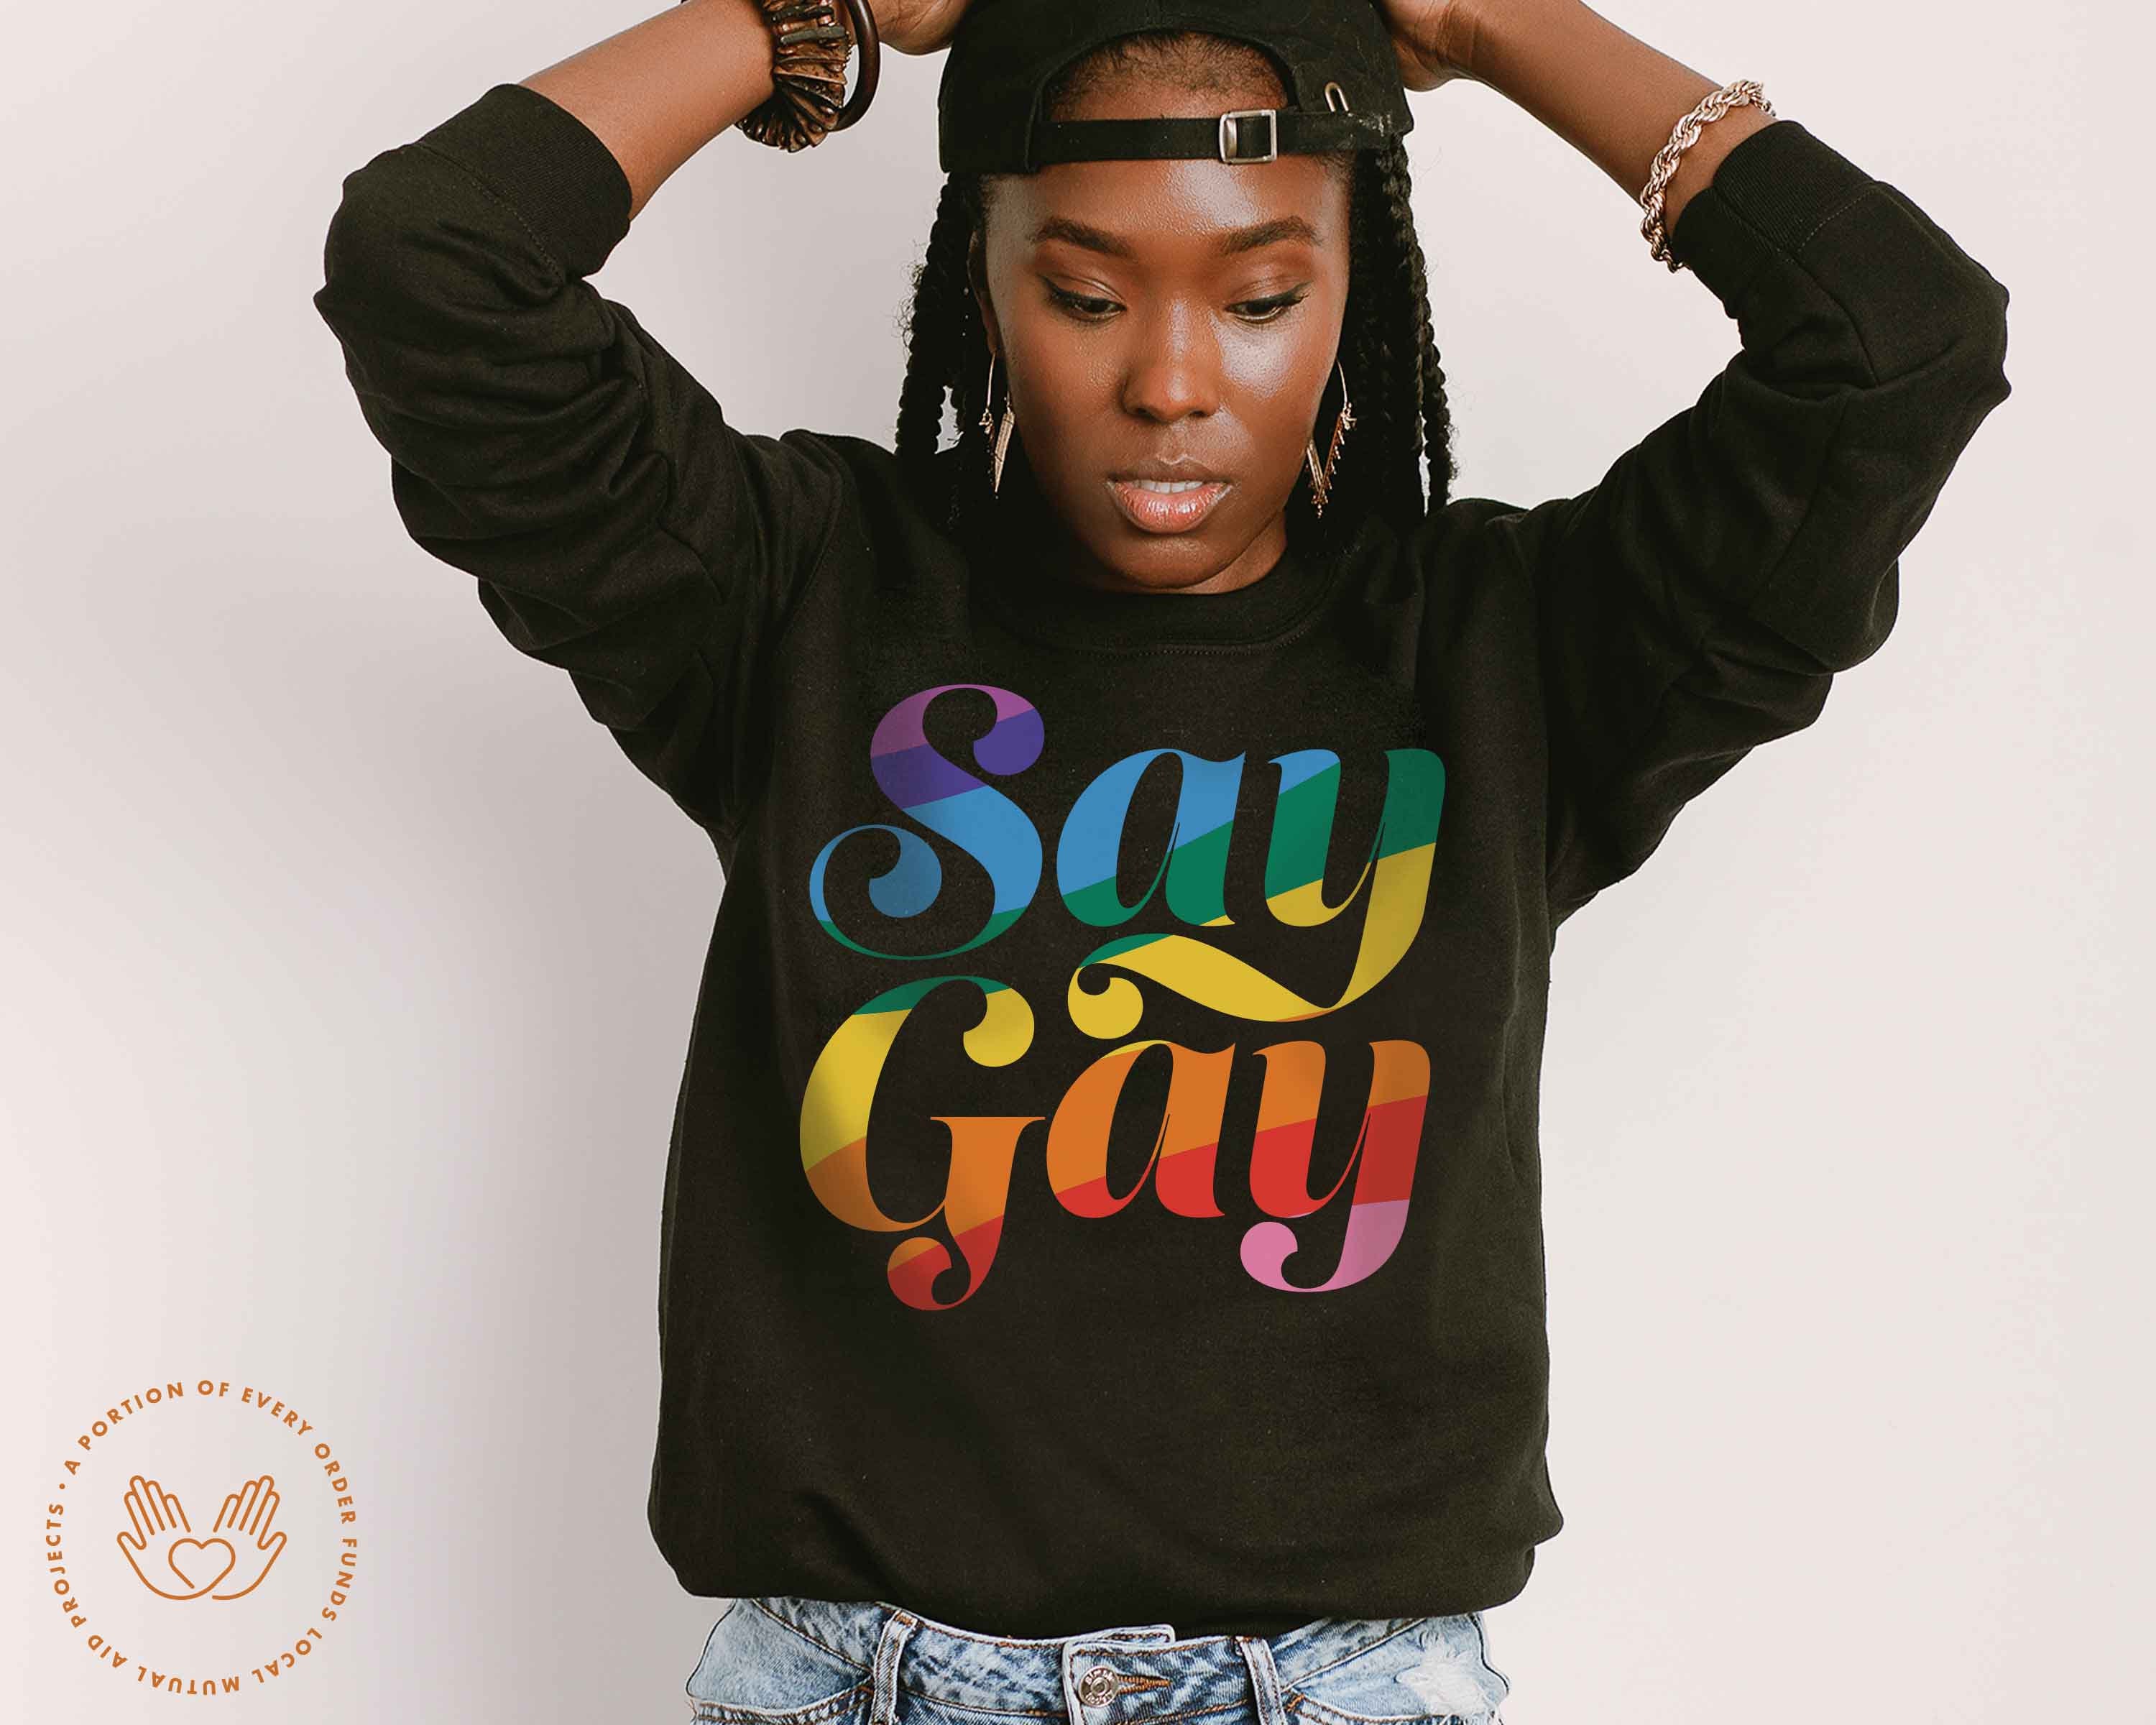  Lesbians are Divine Lesbian Bisexual Trans Gay Pride Pullover  Hoodie : Clothing, Shoes & Jewelry